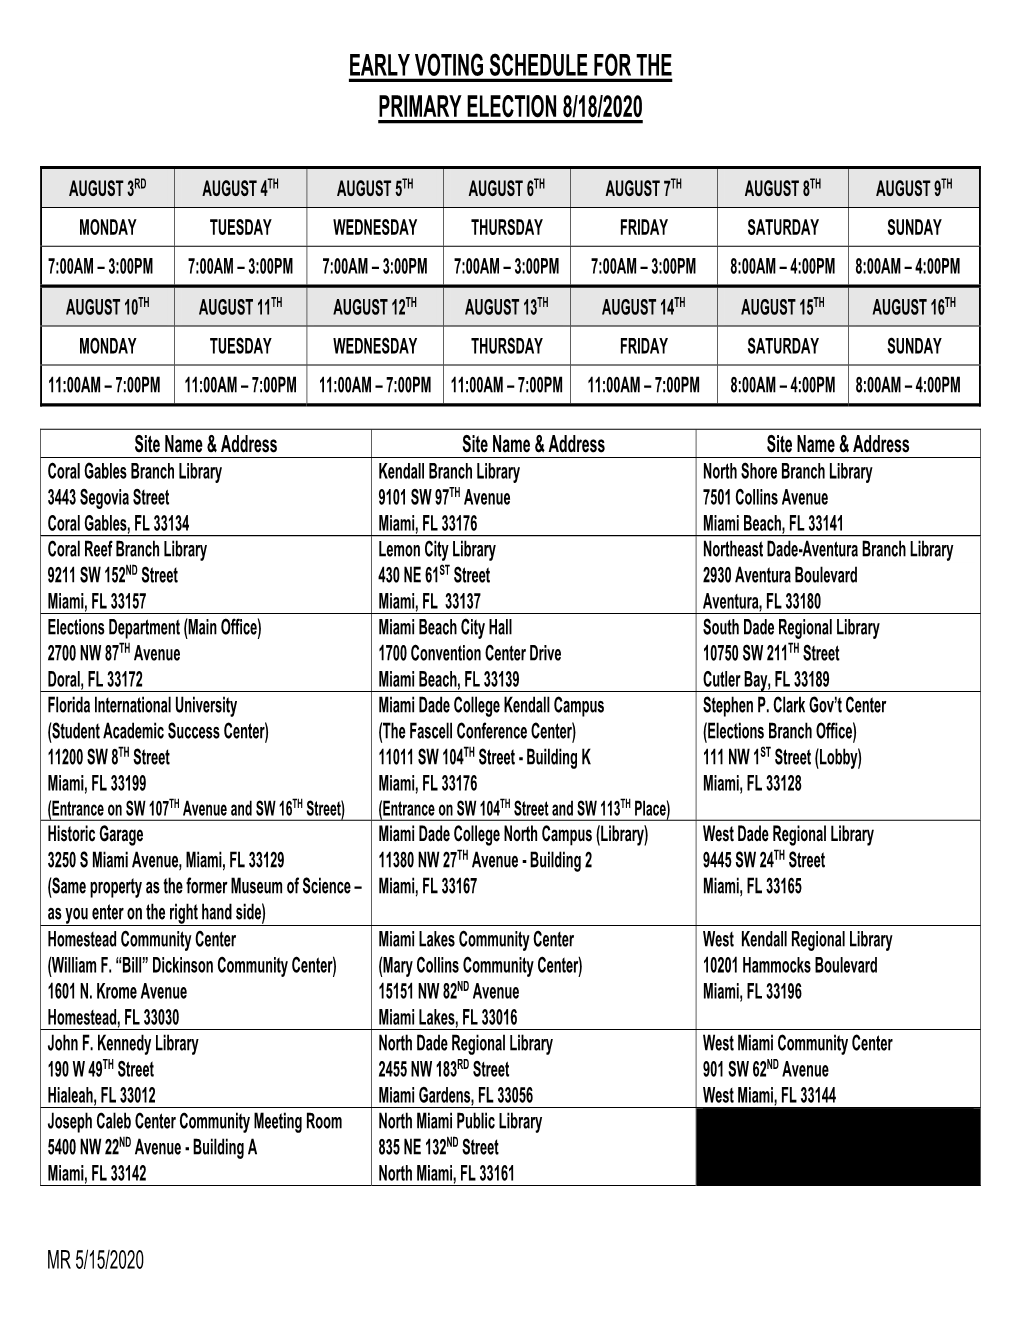 Early Voting Schedule for the Primary Election 8/18/2020